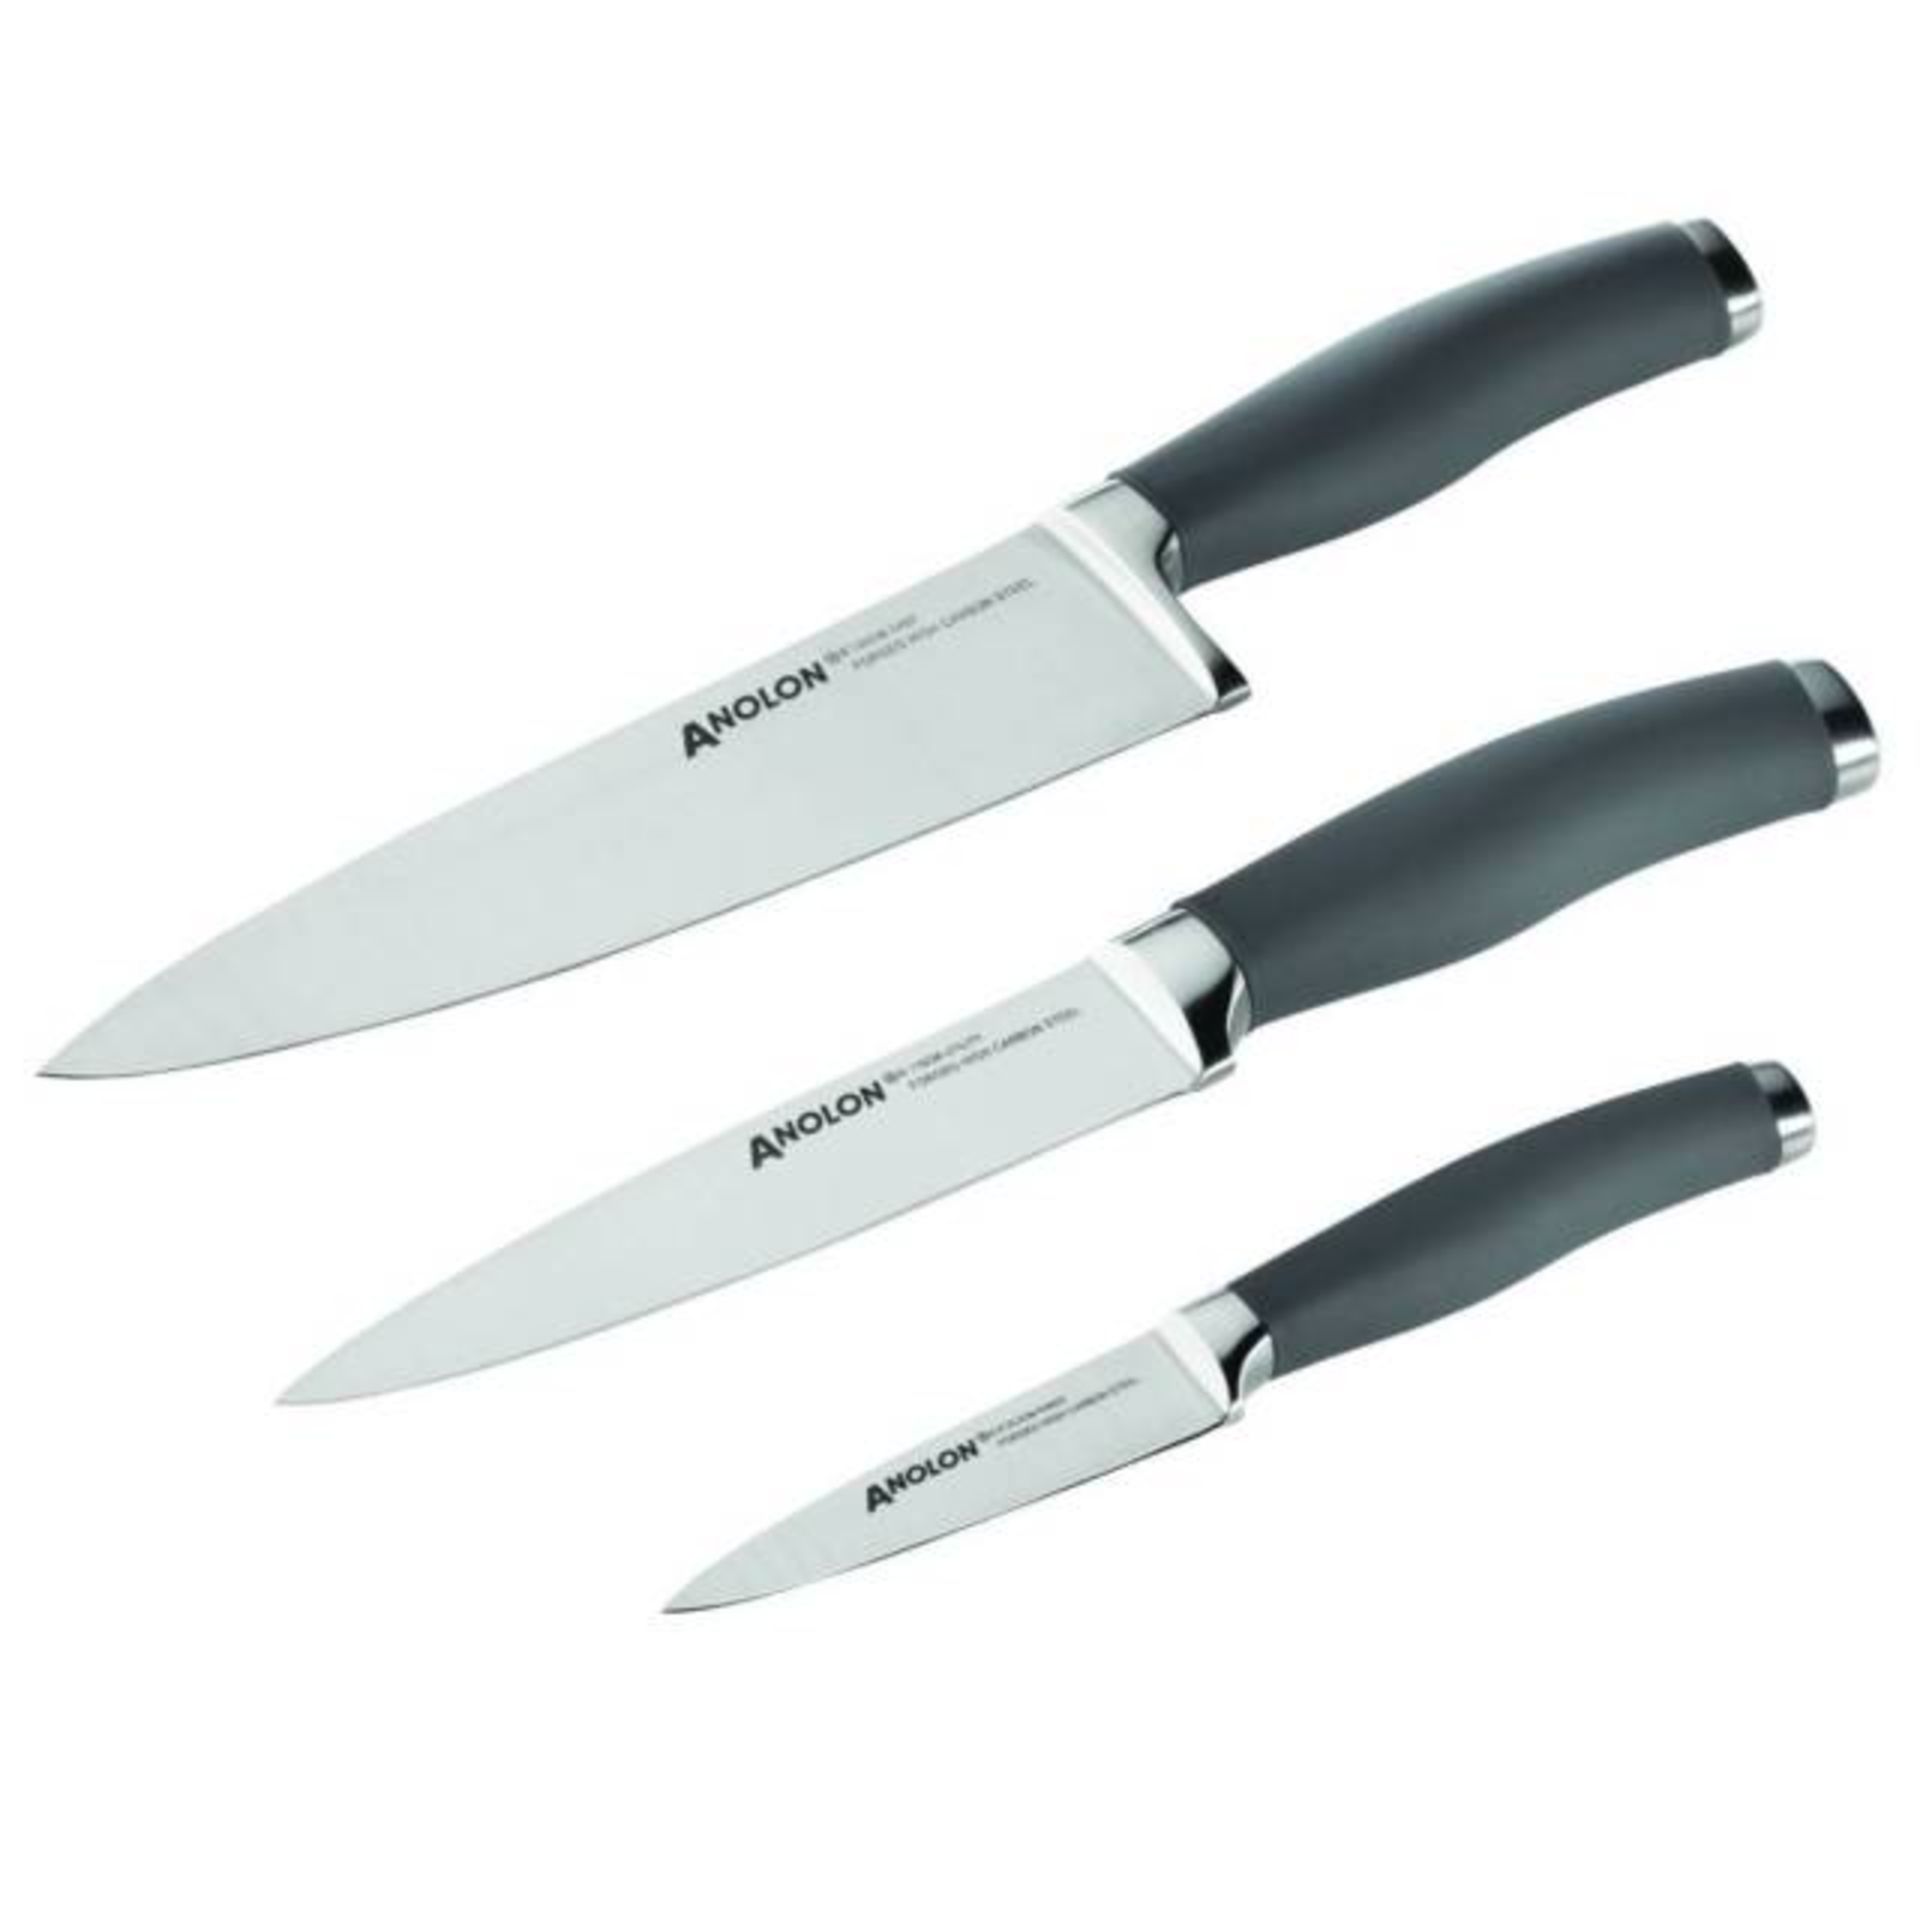 V Brand New 3pc Performance Stainless Steel Knife Set 20cm/12cm/9cm - Forged One Piece